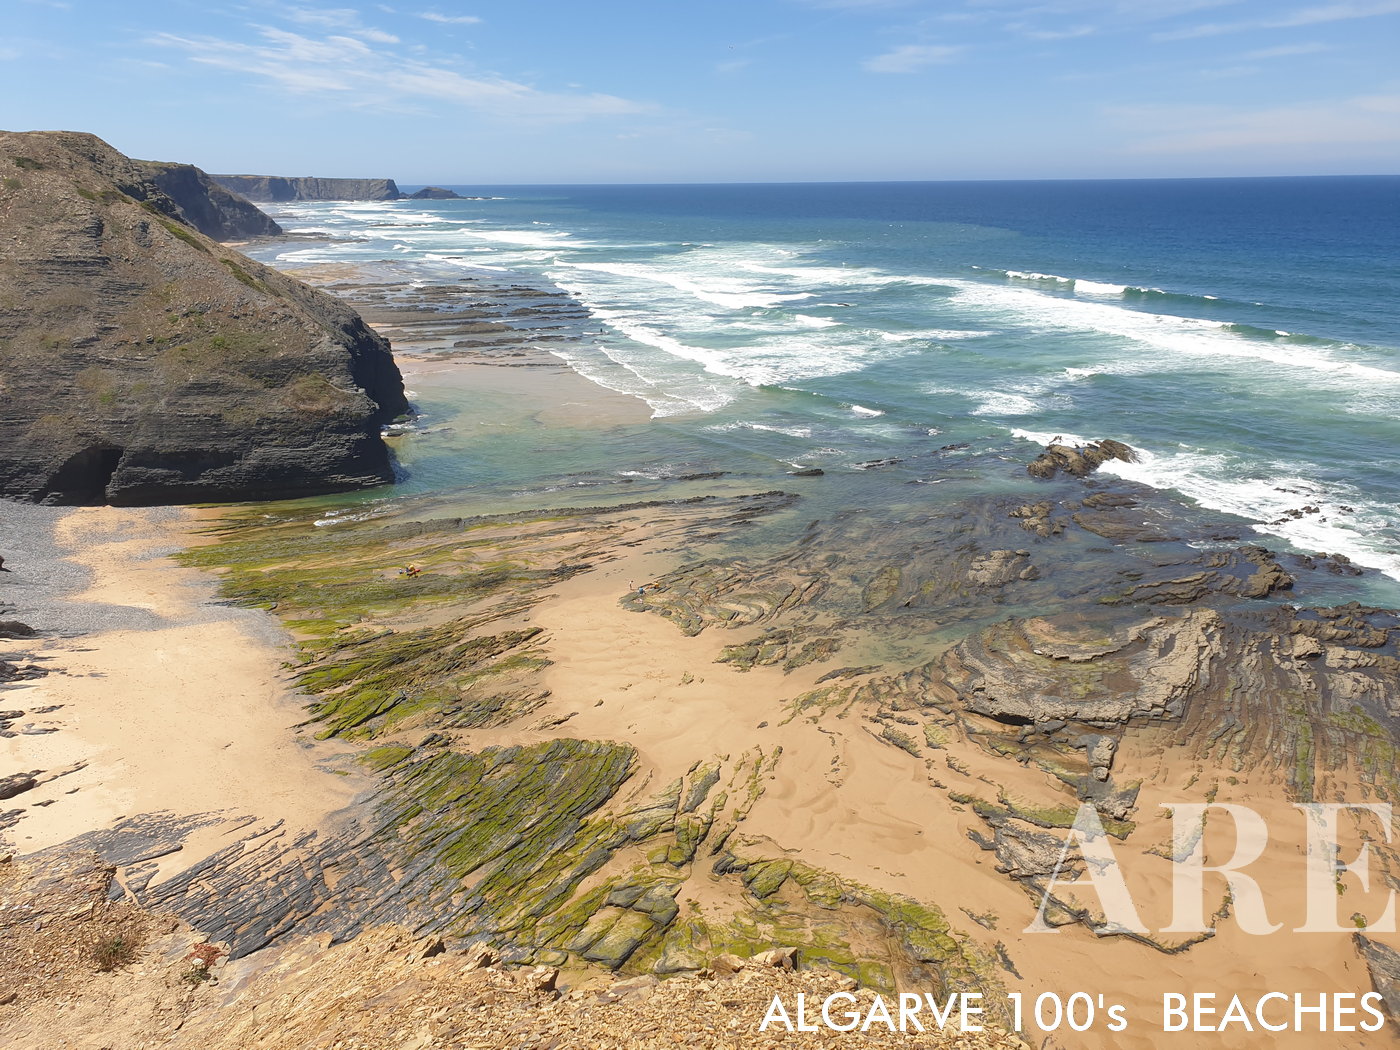 Southern view of Monte Clérigo Beach at low tide reveals a diverse landscape. The rocky formations, interspersed with smooth sand, foreground the commanding cliff views, presenting a captivating portrait of this coastal area.